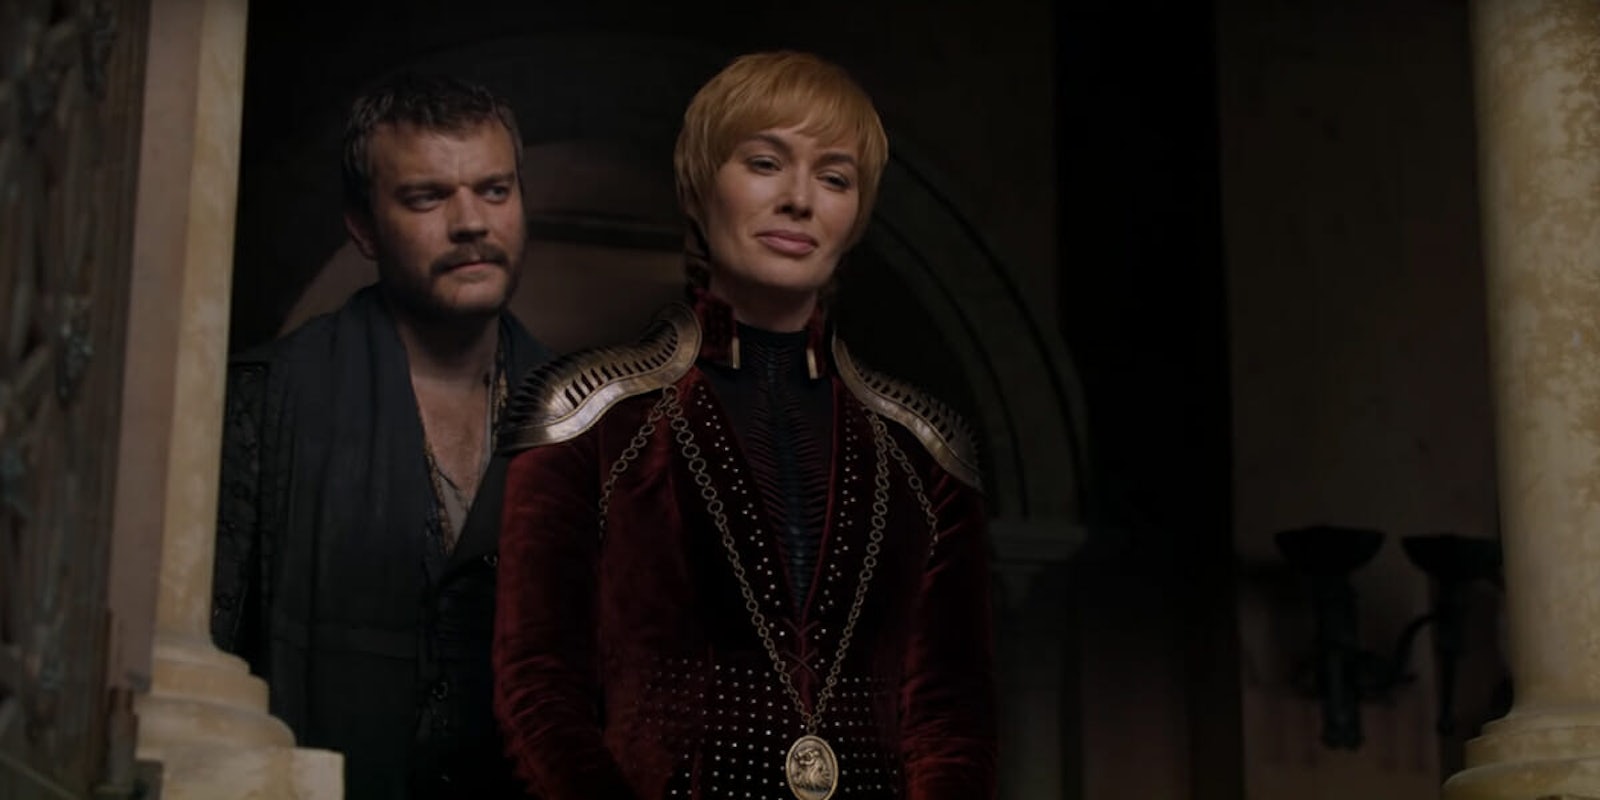 watch game of thrones season 8, episode 4 for free